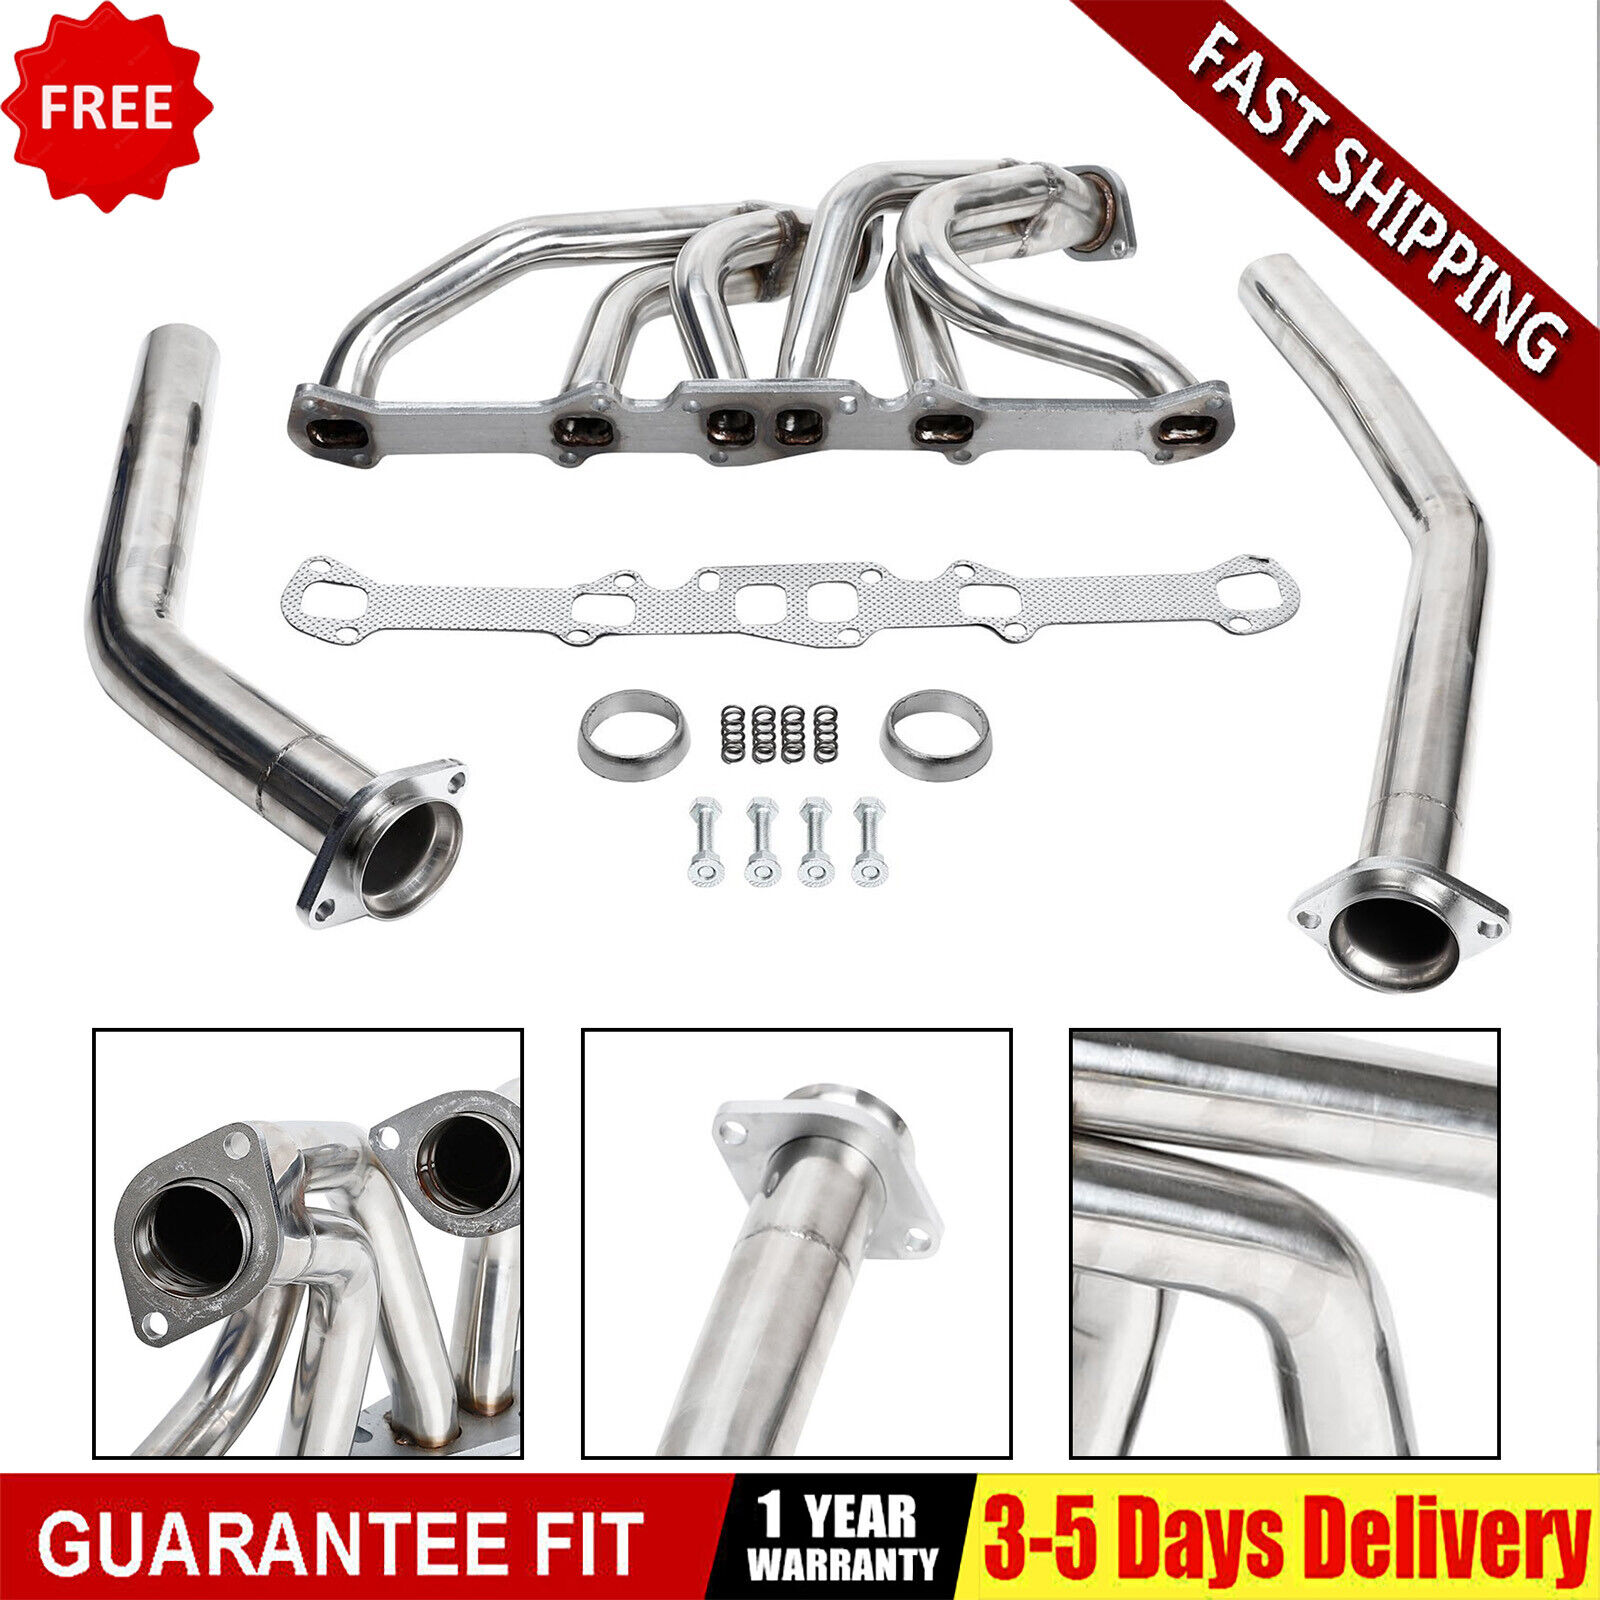 Stainless Exhaust Header Kit For Ford Falcon Mustang 2.8 3.3 Mercury 2.4 2.8 3.3